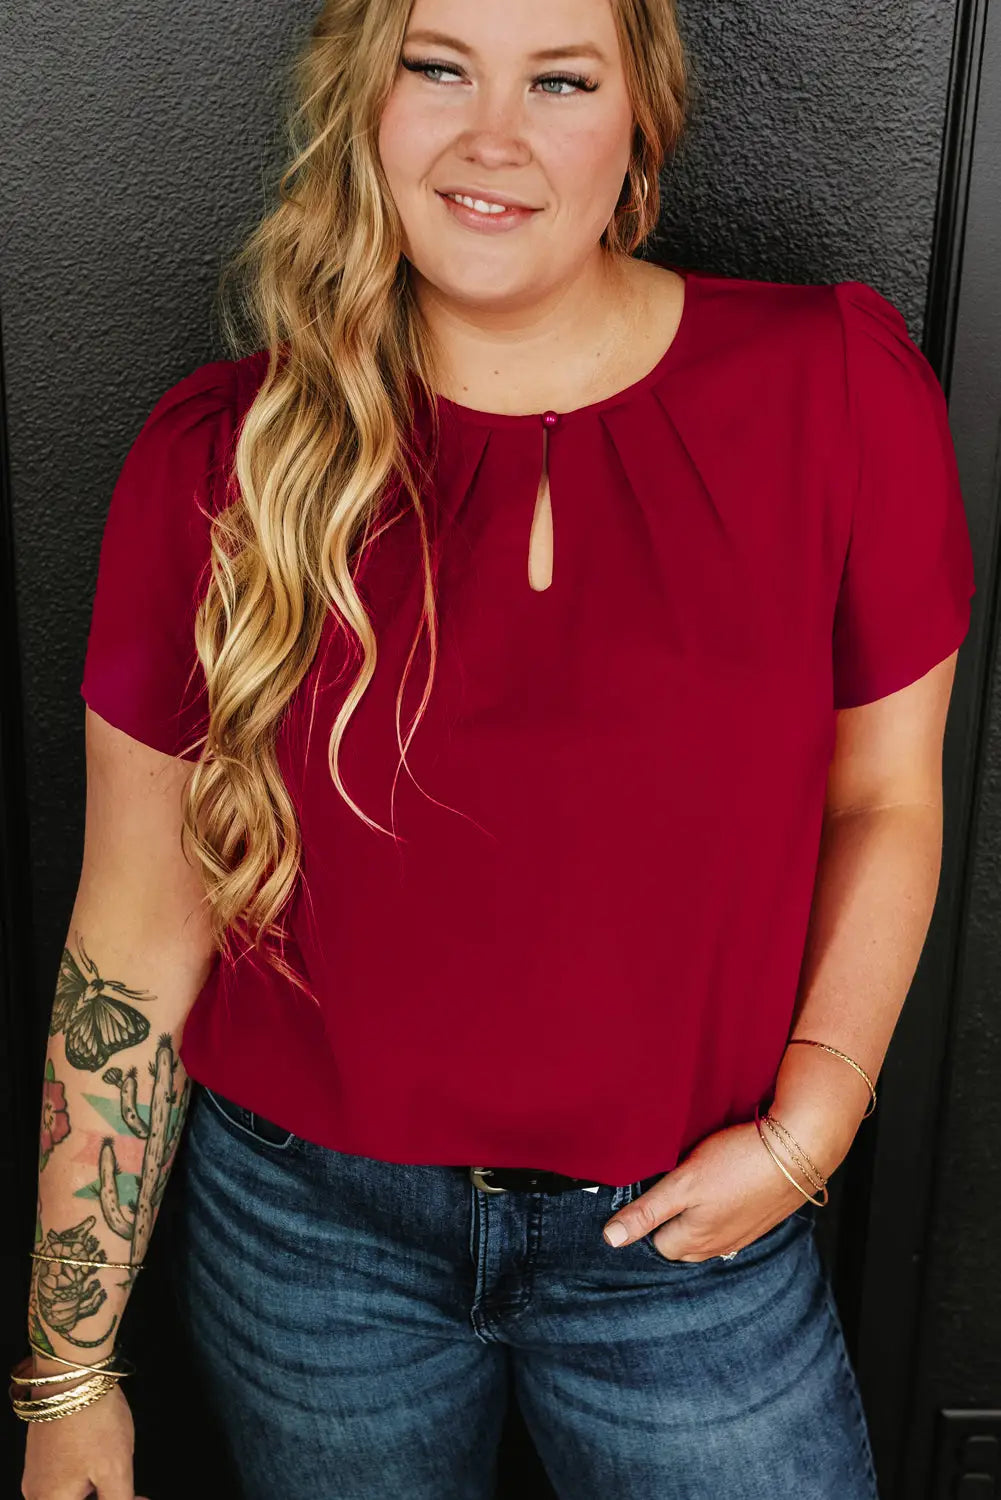 Black keyhole pleated plus size t shirt - red dahlia / 1x / 100% polyester - tops & tees